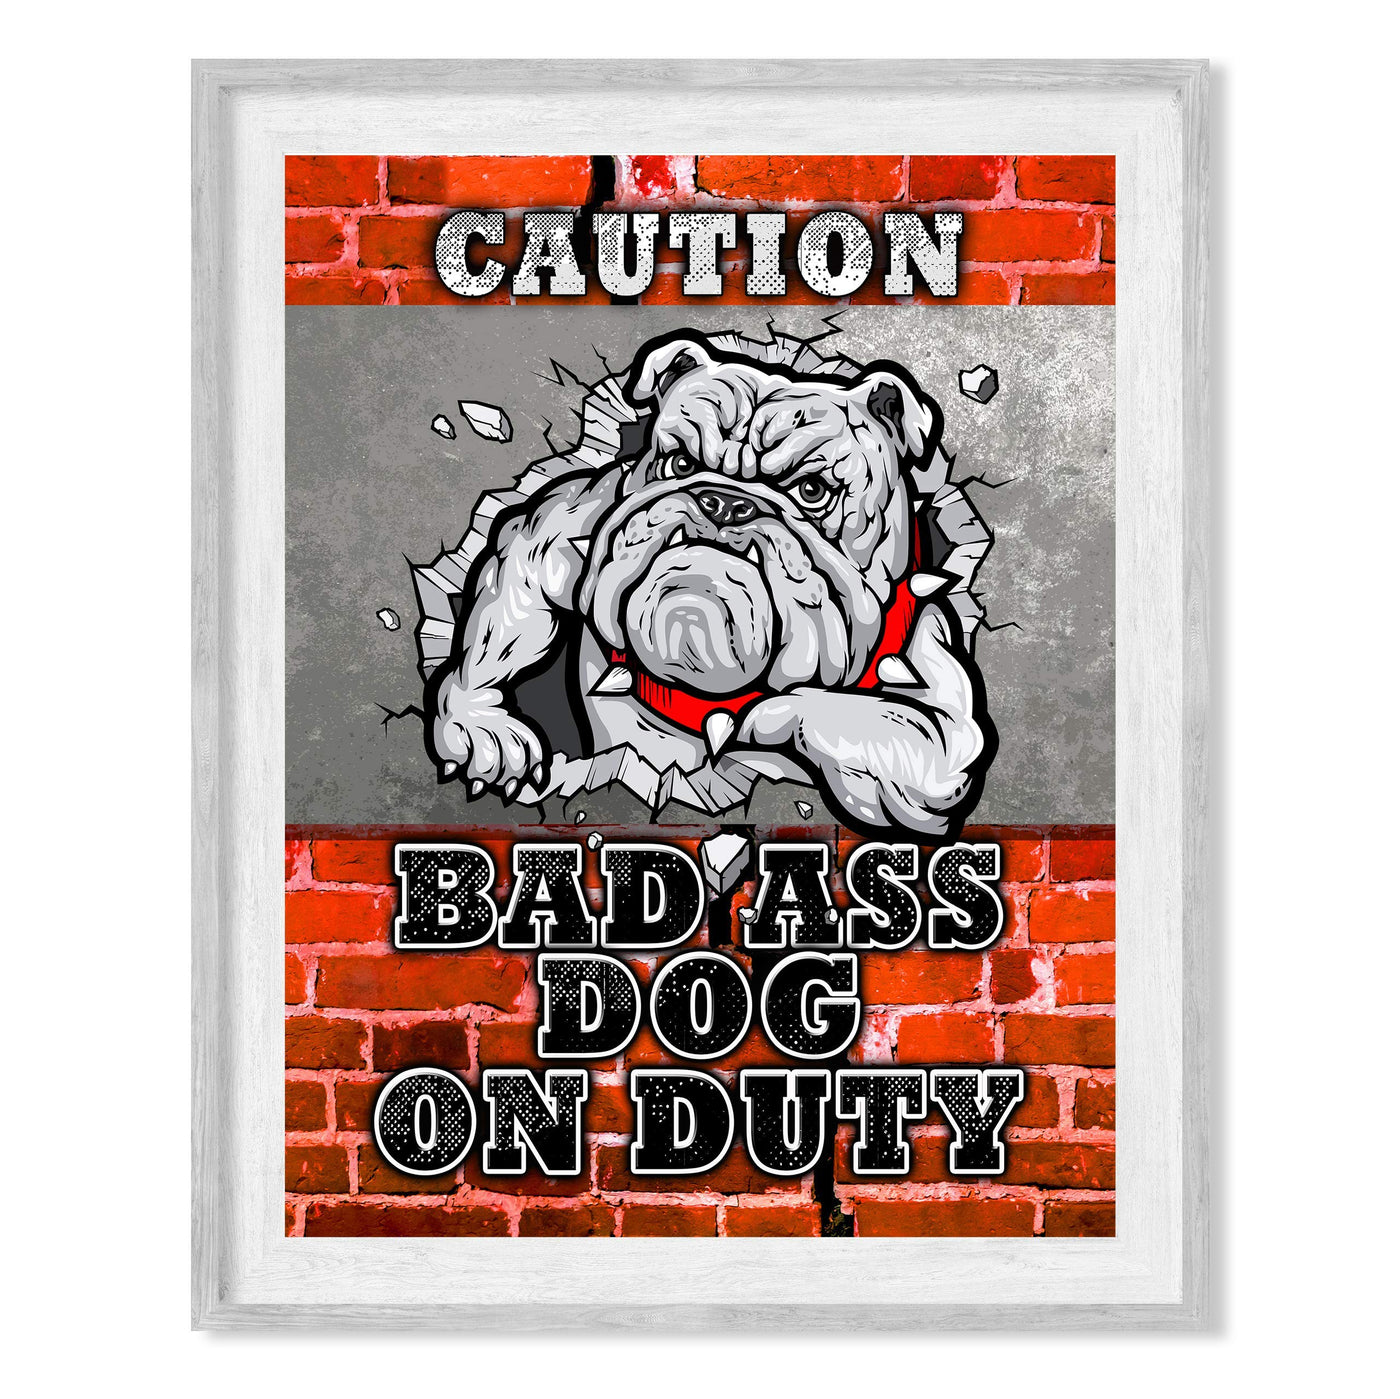 Caution: Badass Dog On Duty Funny Pet Sign-8 x 10" Typographic Brick Wall Art Print w/Bulldog Image-Ready to Frame. Humorous Decor for Home-Kitchen-Garage-Shop-Patio. Fun Gift for All Dog Lovers!